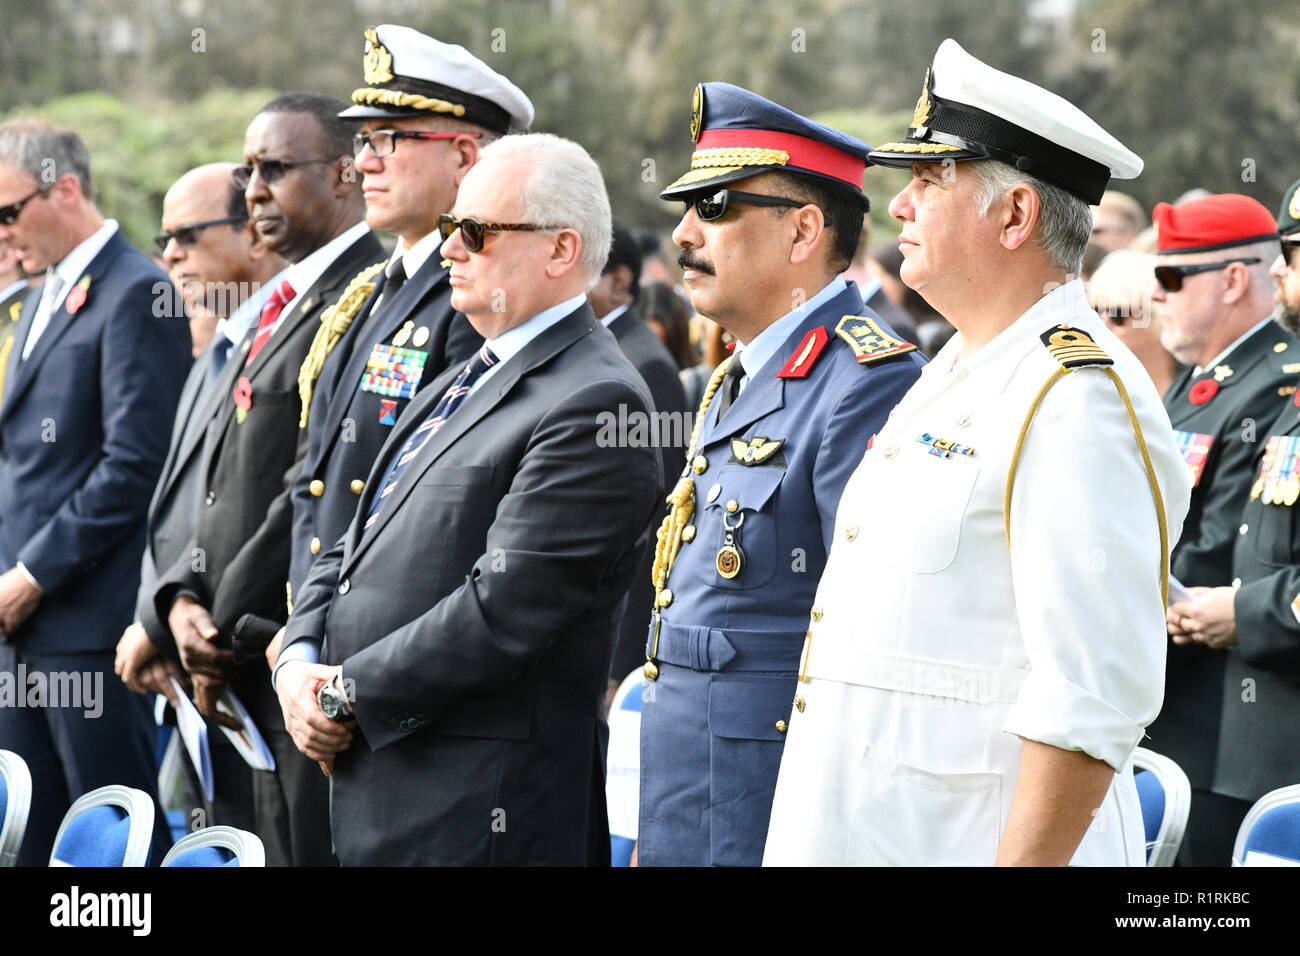 Participant in the commemoration ceremony at the Commonwealth Cemetery in Heliopolis on the occasion of the 100th anniversary of the ceasefire of November 11, 1918, taken on November 11, 1818. This historic event was commemorated in Cairo with wreath-laying ceremonies and solemn ceremonies of former war participants. The joint German-French kick-off event at the German Protestant High School Cairo was followed by a wreath-laying ceremony at the German and French cemeteries in Cairo, followed by a reception by the French ambassador. Afterwithday, the event ended at the Commonwealth Cemetery in Stock Photo